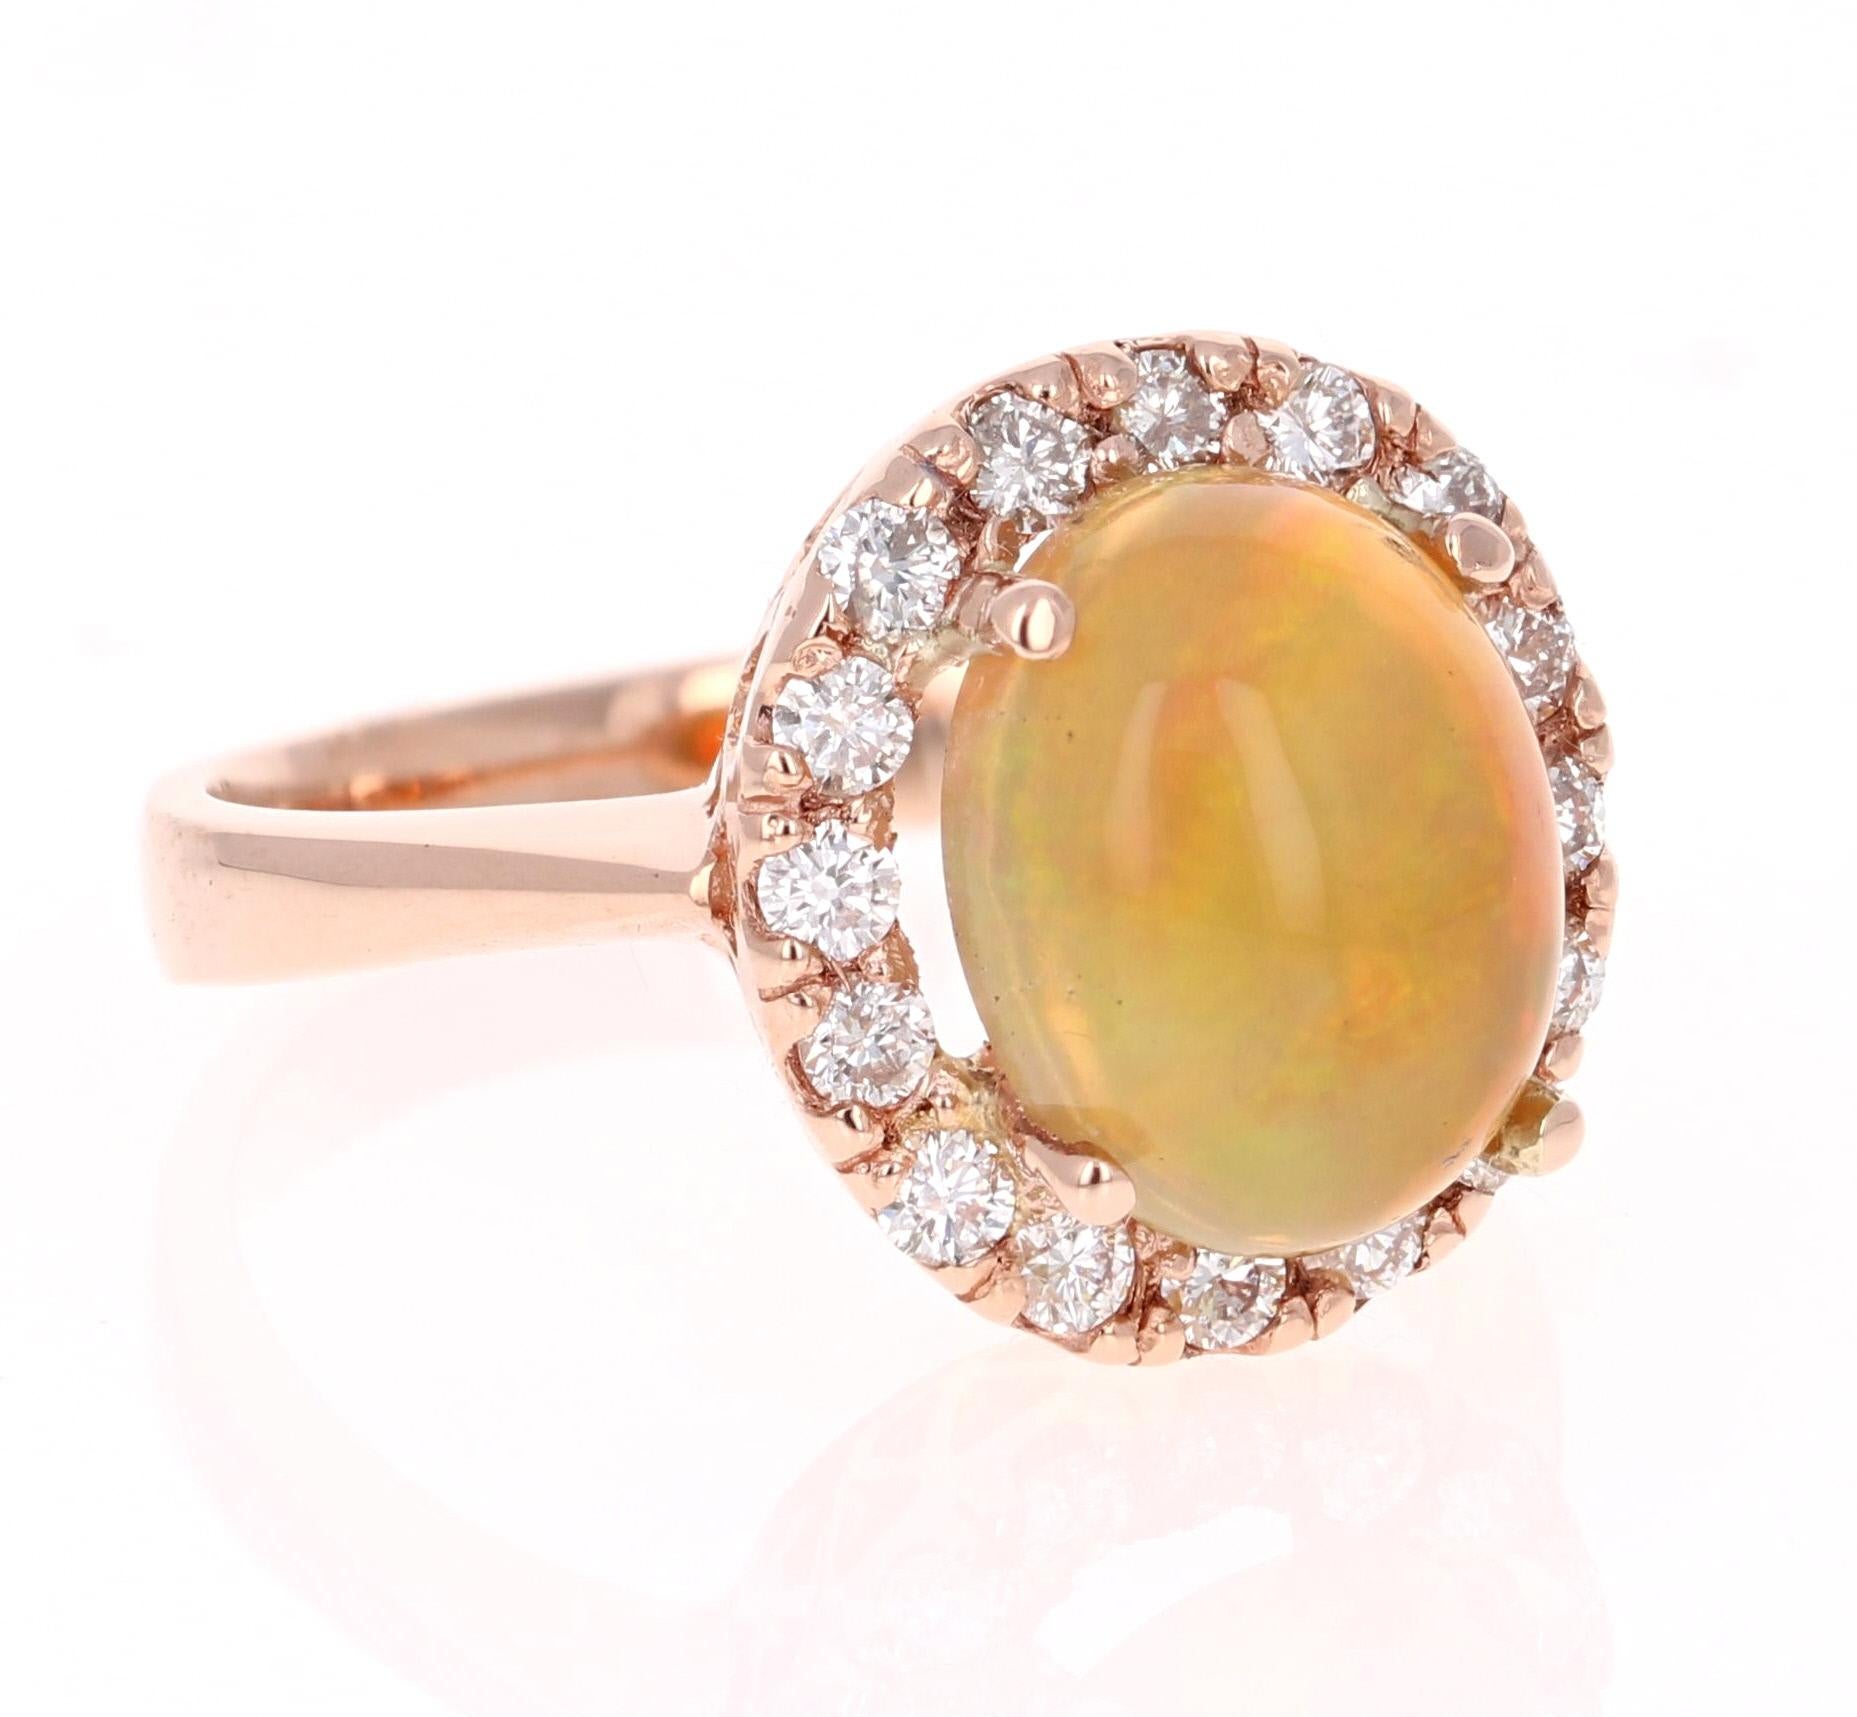 Beautiful and Cute! Who would have thought something so simple can be so sweet! This Opal and Diamond Ring is made in a 14K Rose Gold setting. It has an Ethiopian Oval Cut Opal which weighs 2.38 carats and is surrounded by a simple halo of 16 Round